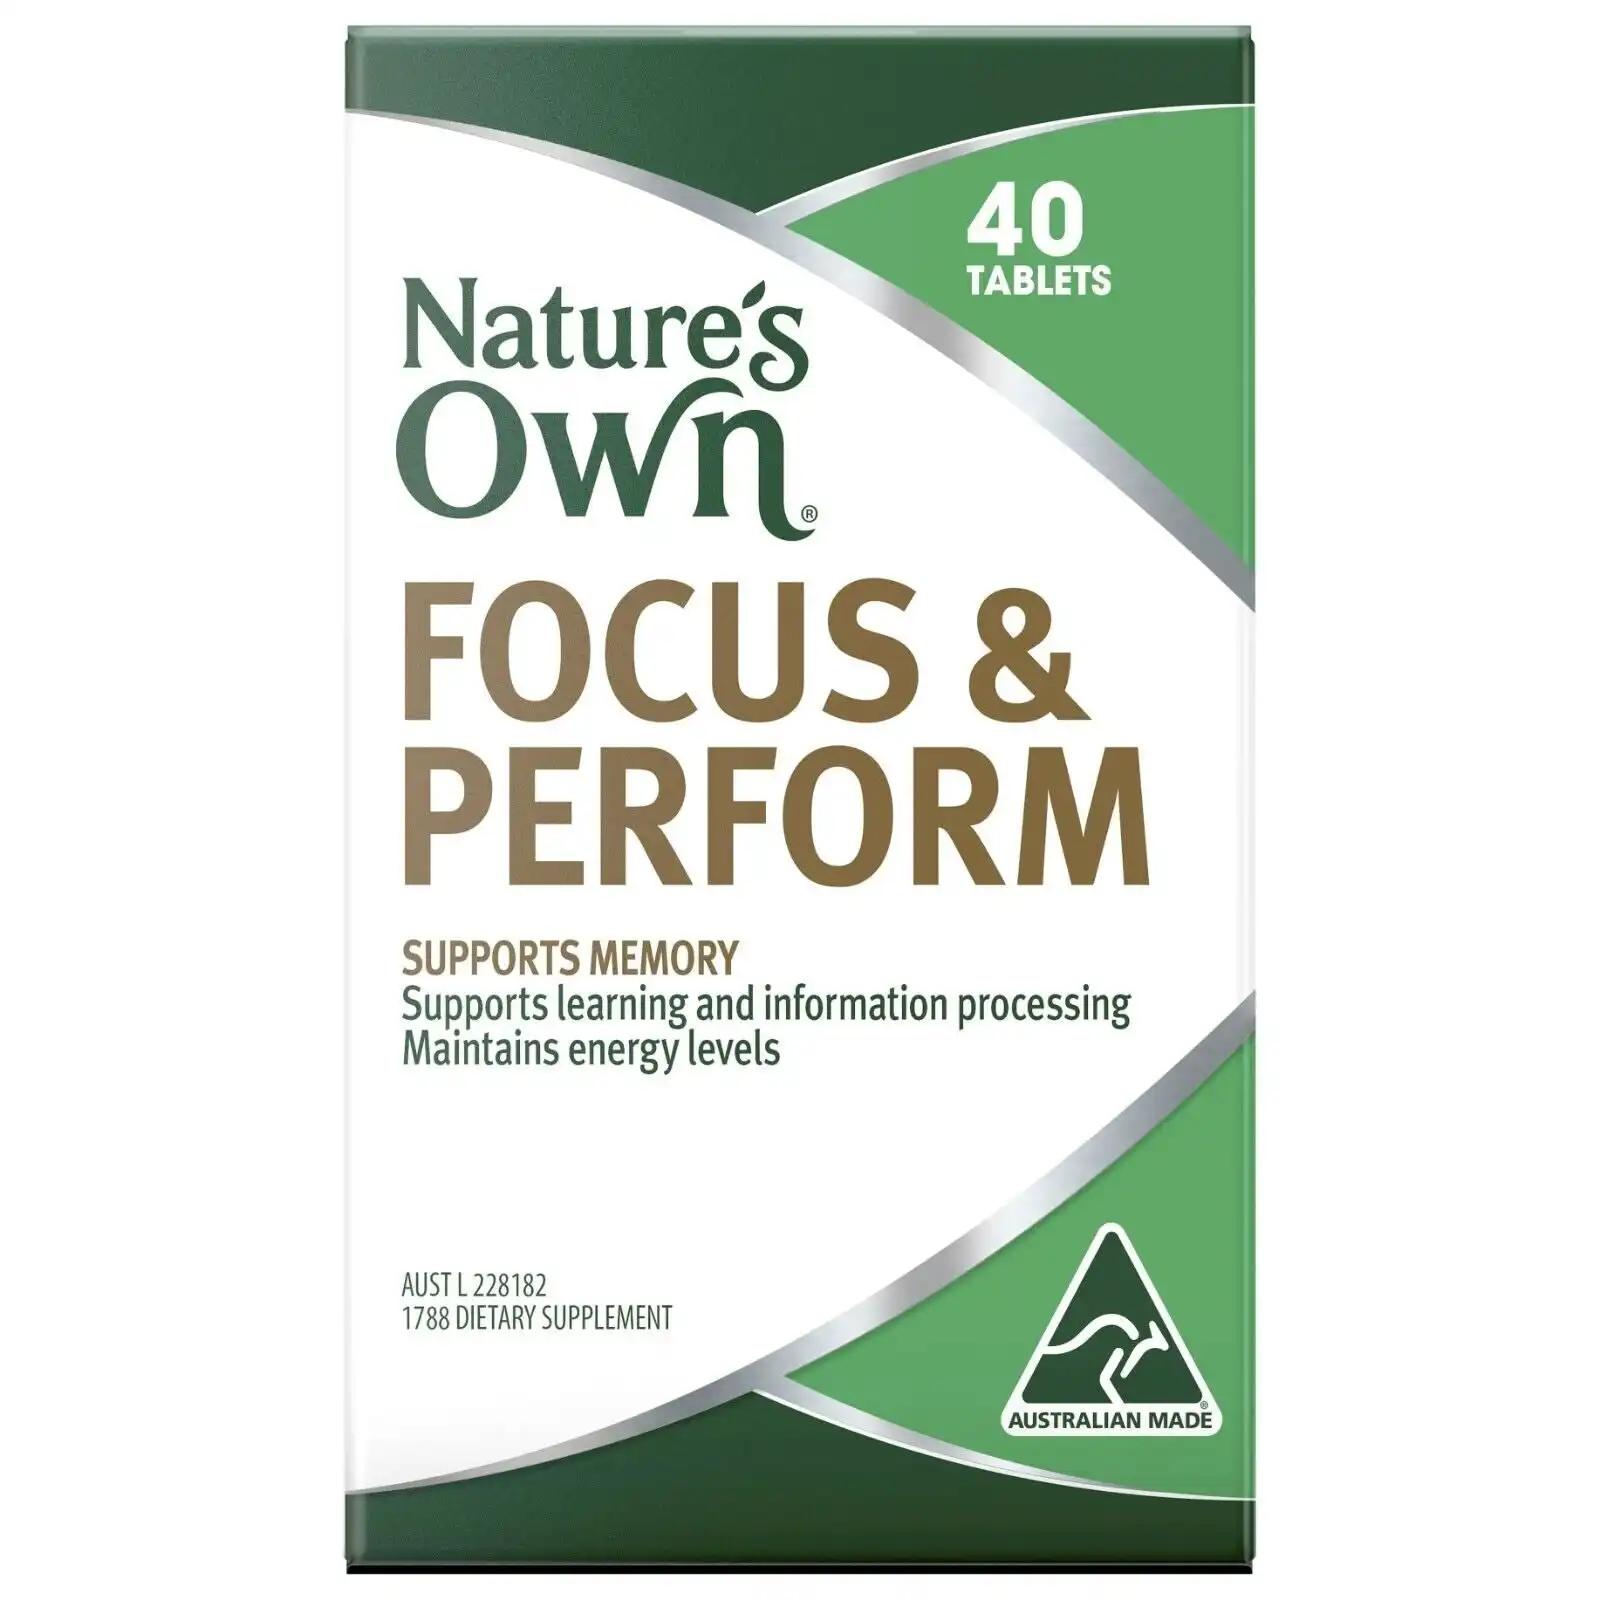 Nature's Own Focus & Perform 40 Tablets for Memory, Stress & Energy Natures Own